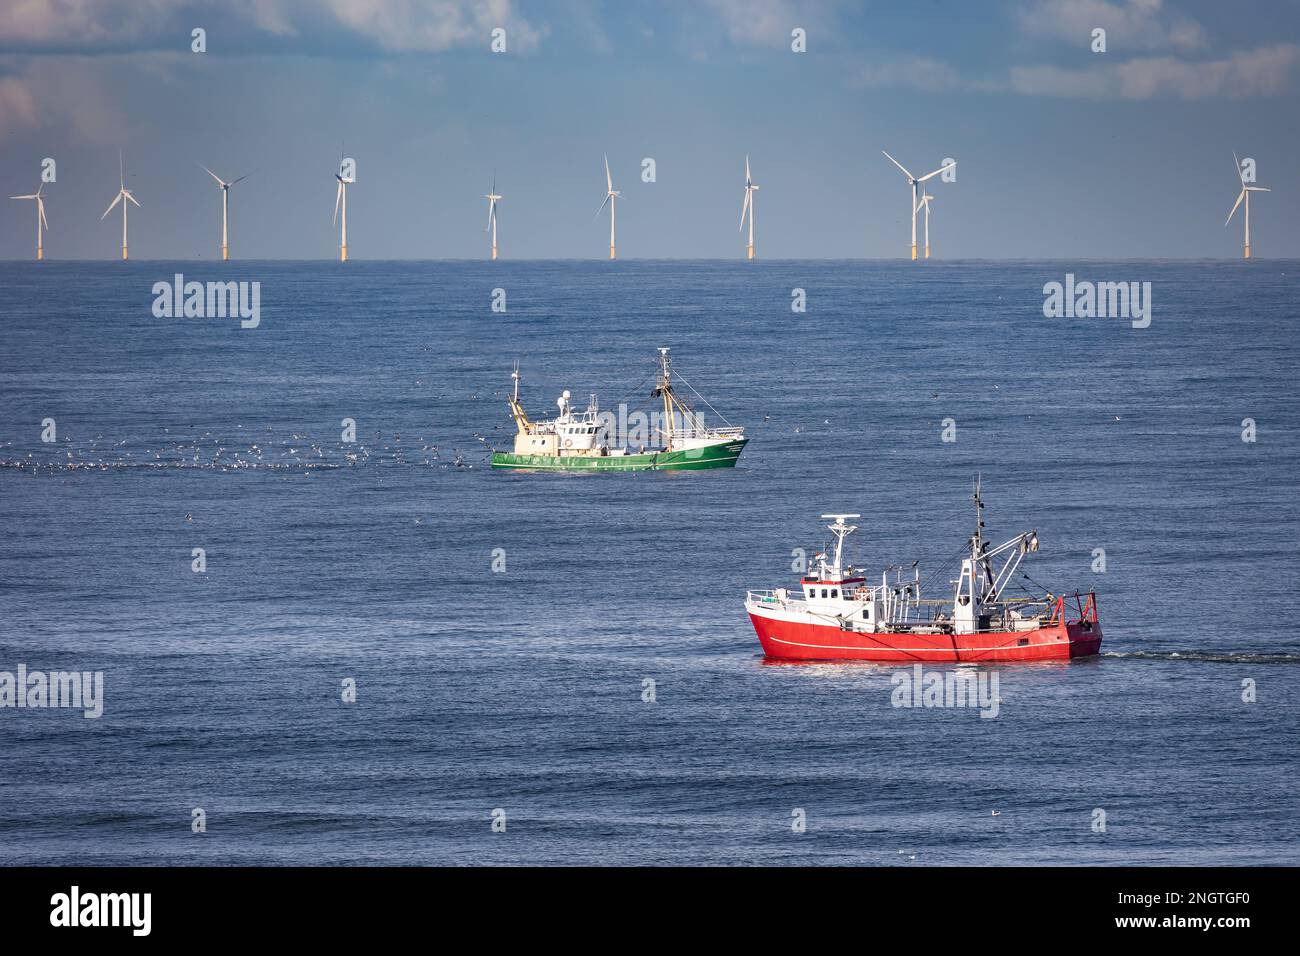 Two cutters passing each other in the North sea with wind turbines of a windfarm in the background Stock Photo